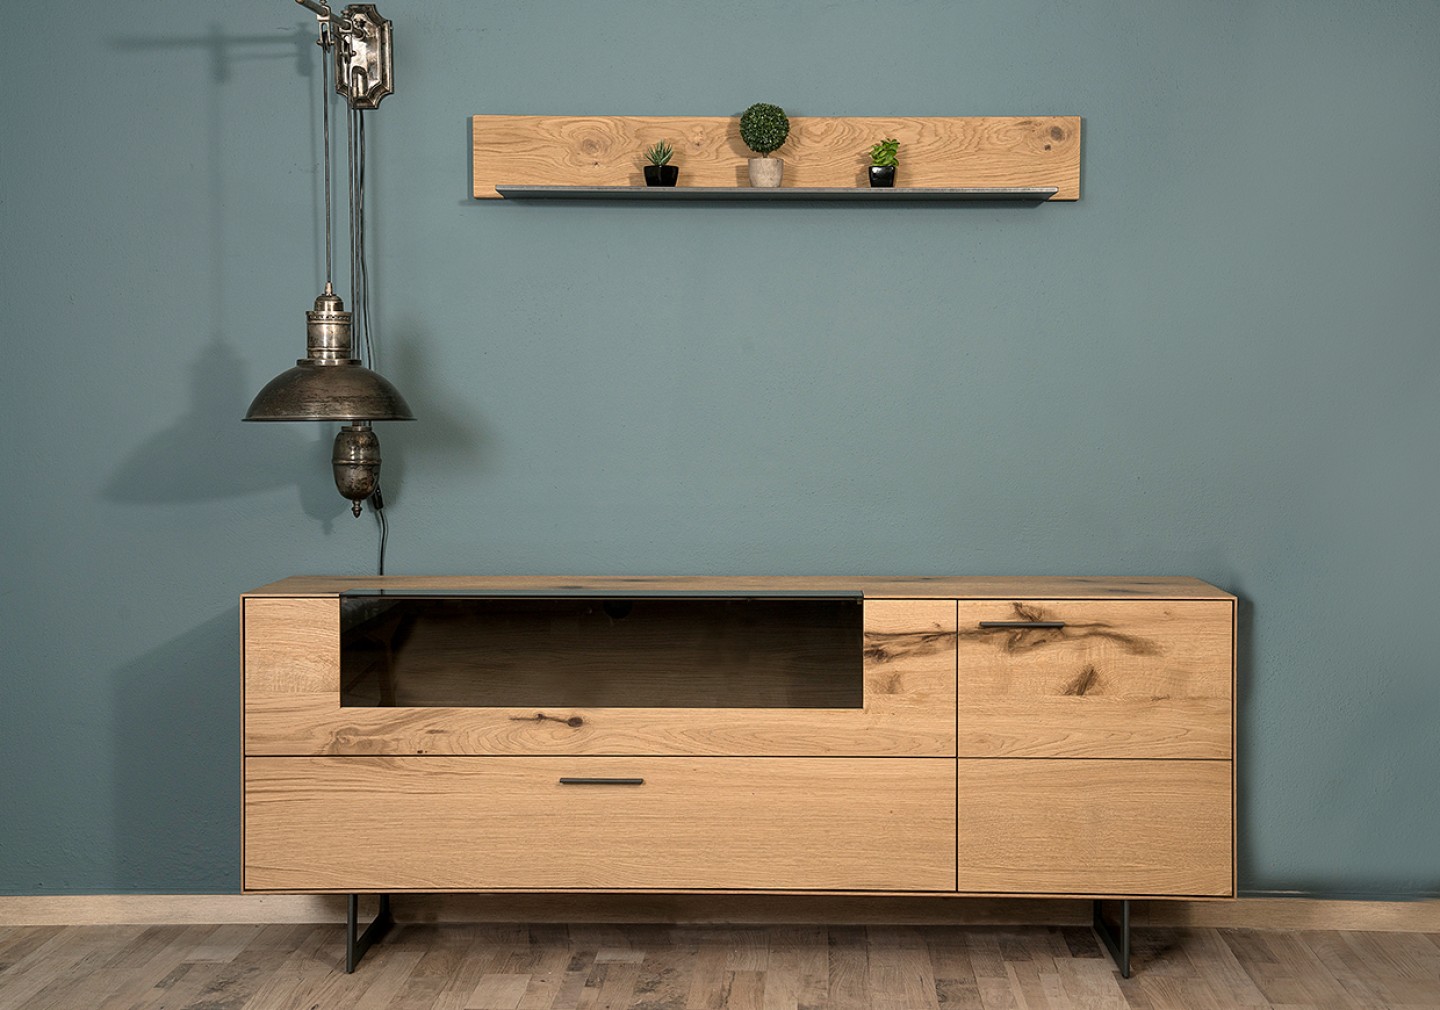 THE FREE WALL SIDEBOARD